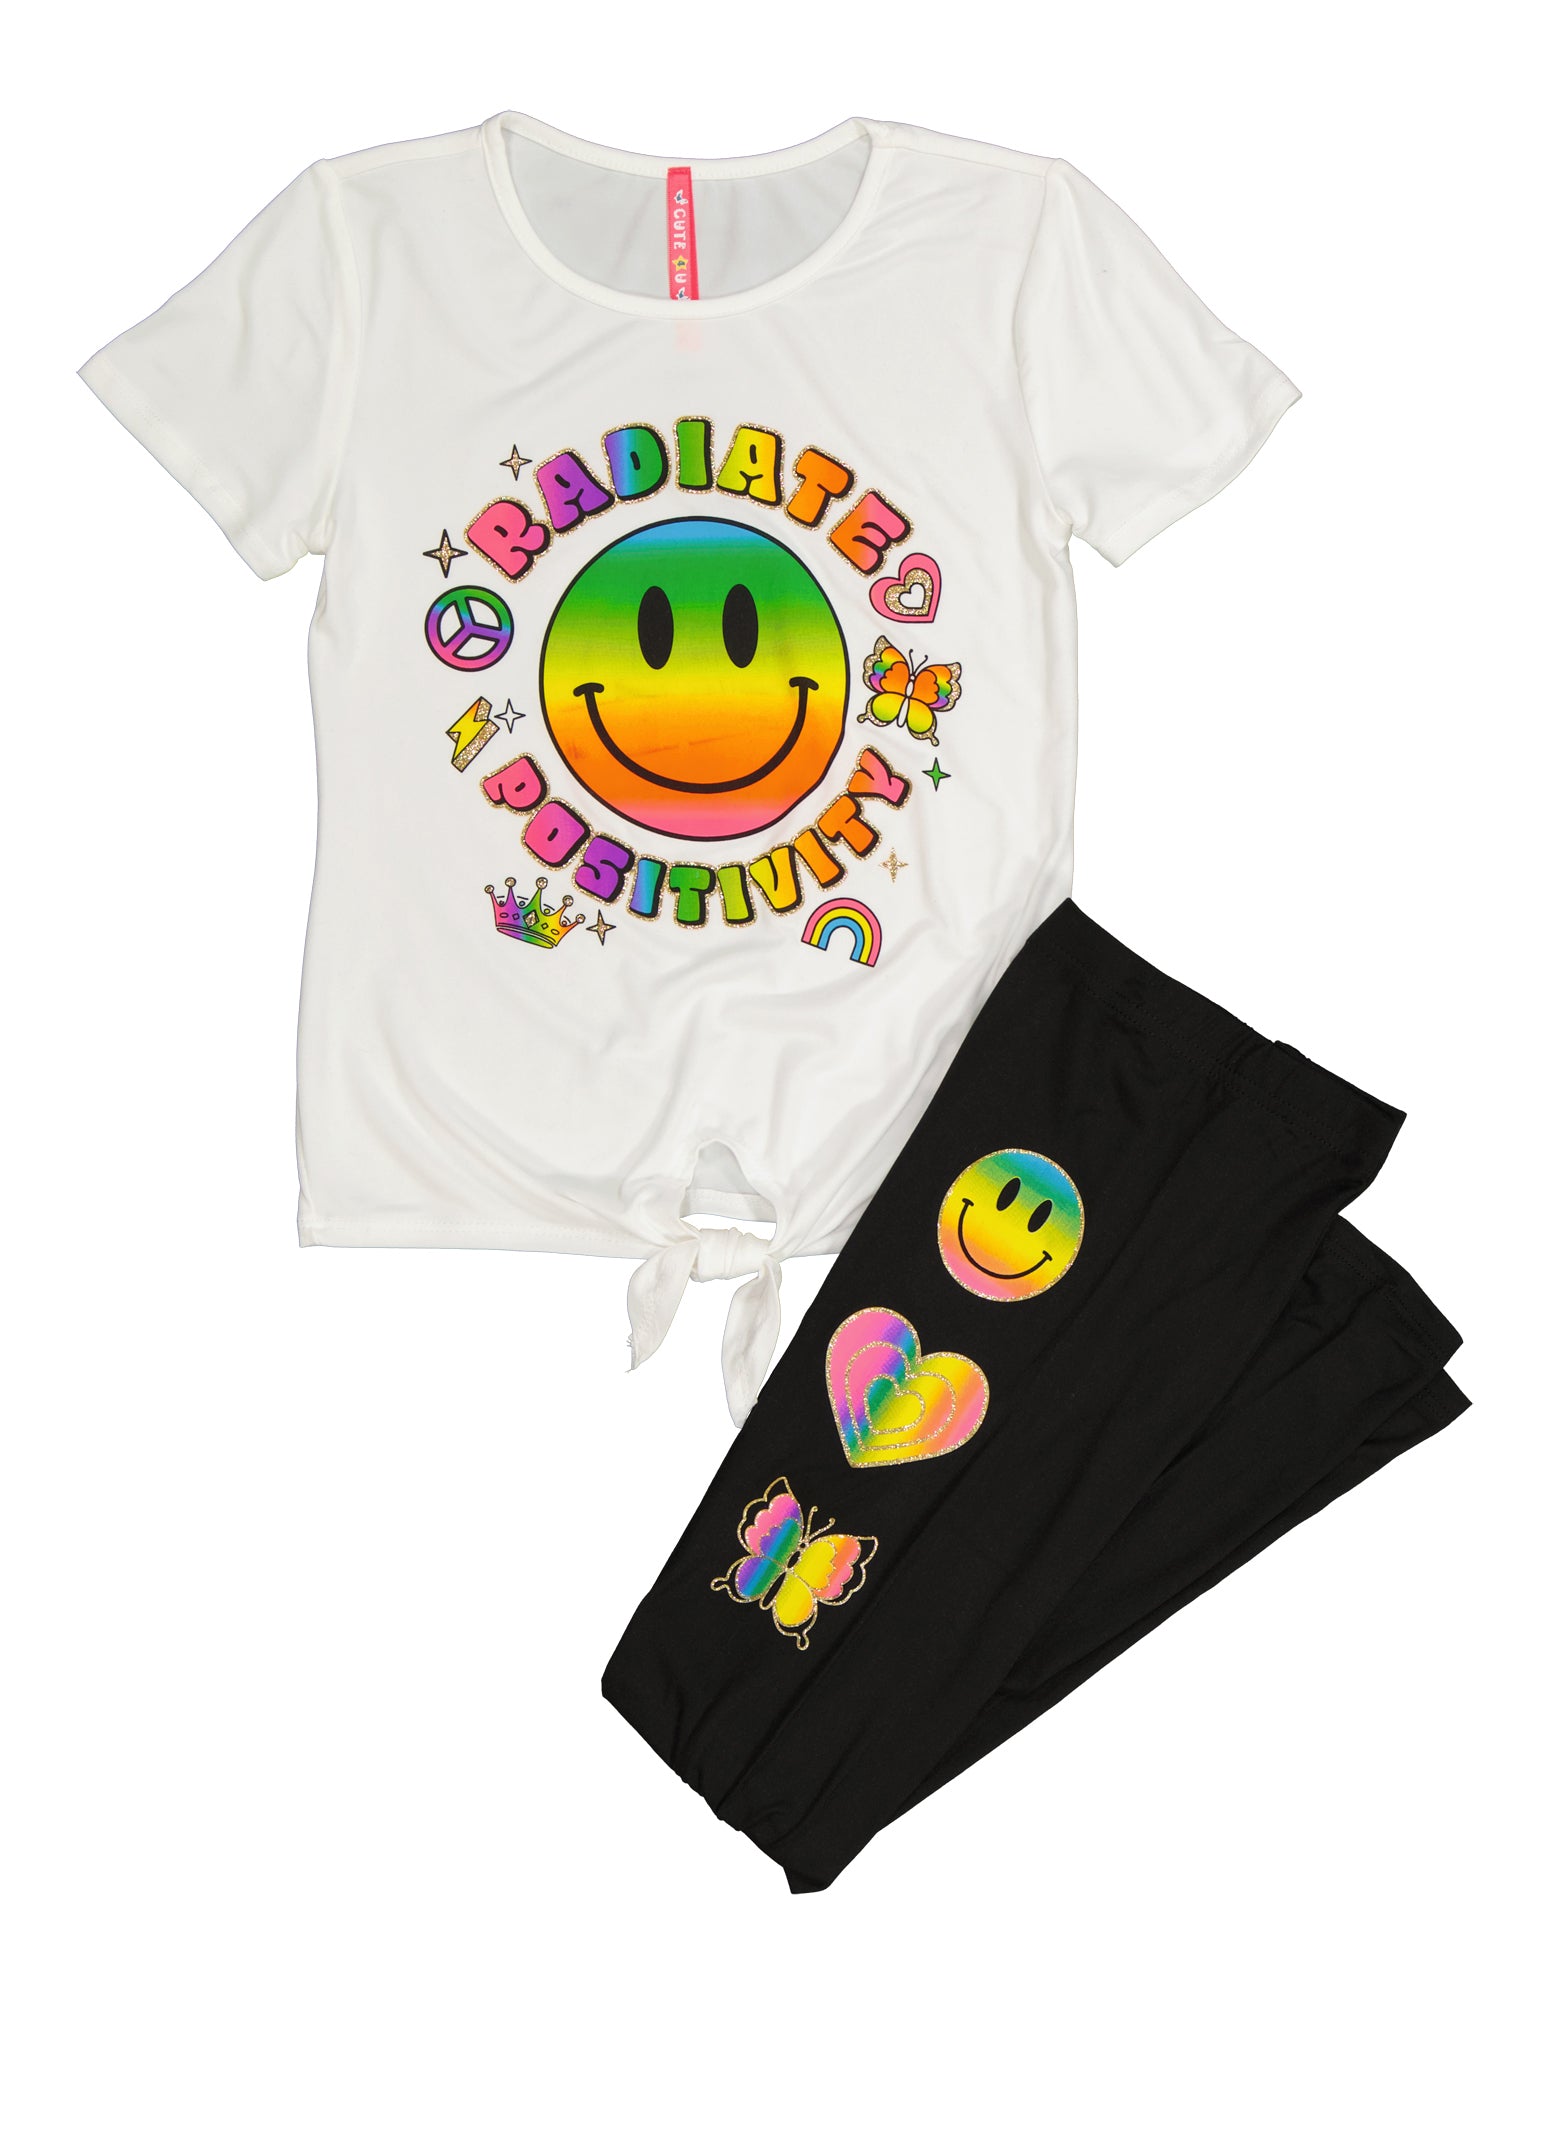 Rainbow Shops Girls Radiant Positivity Graphic Tee and Leggings, White,  Size 14-16